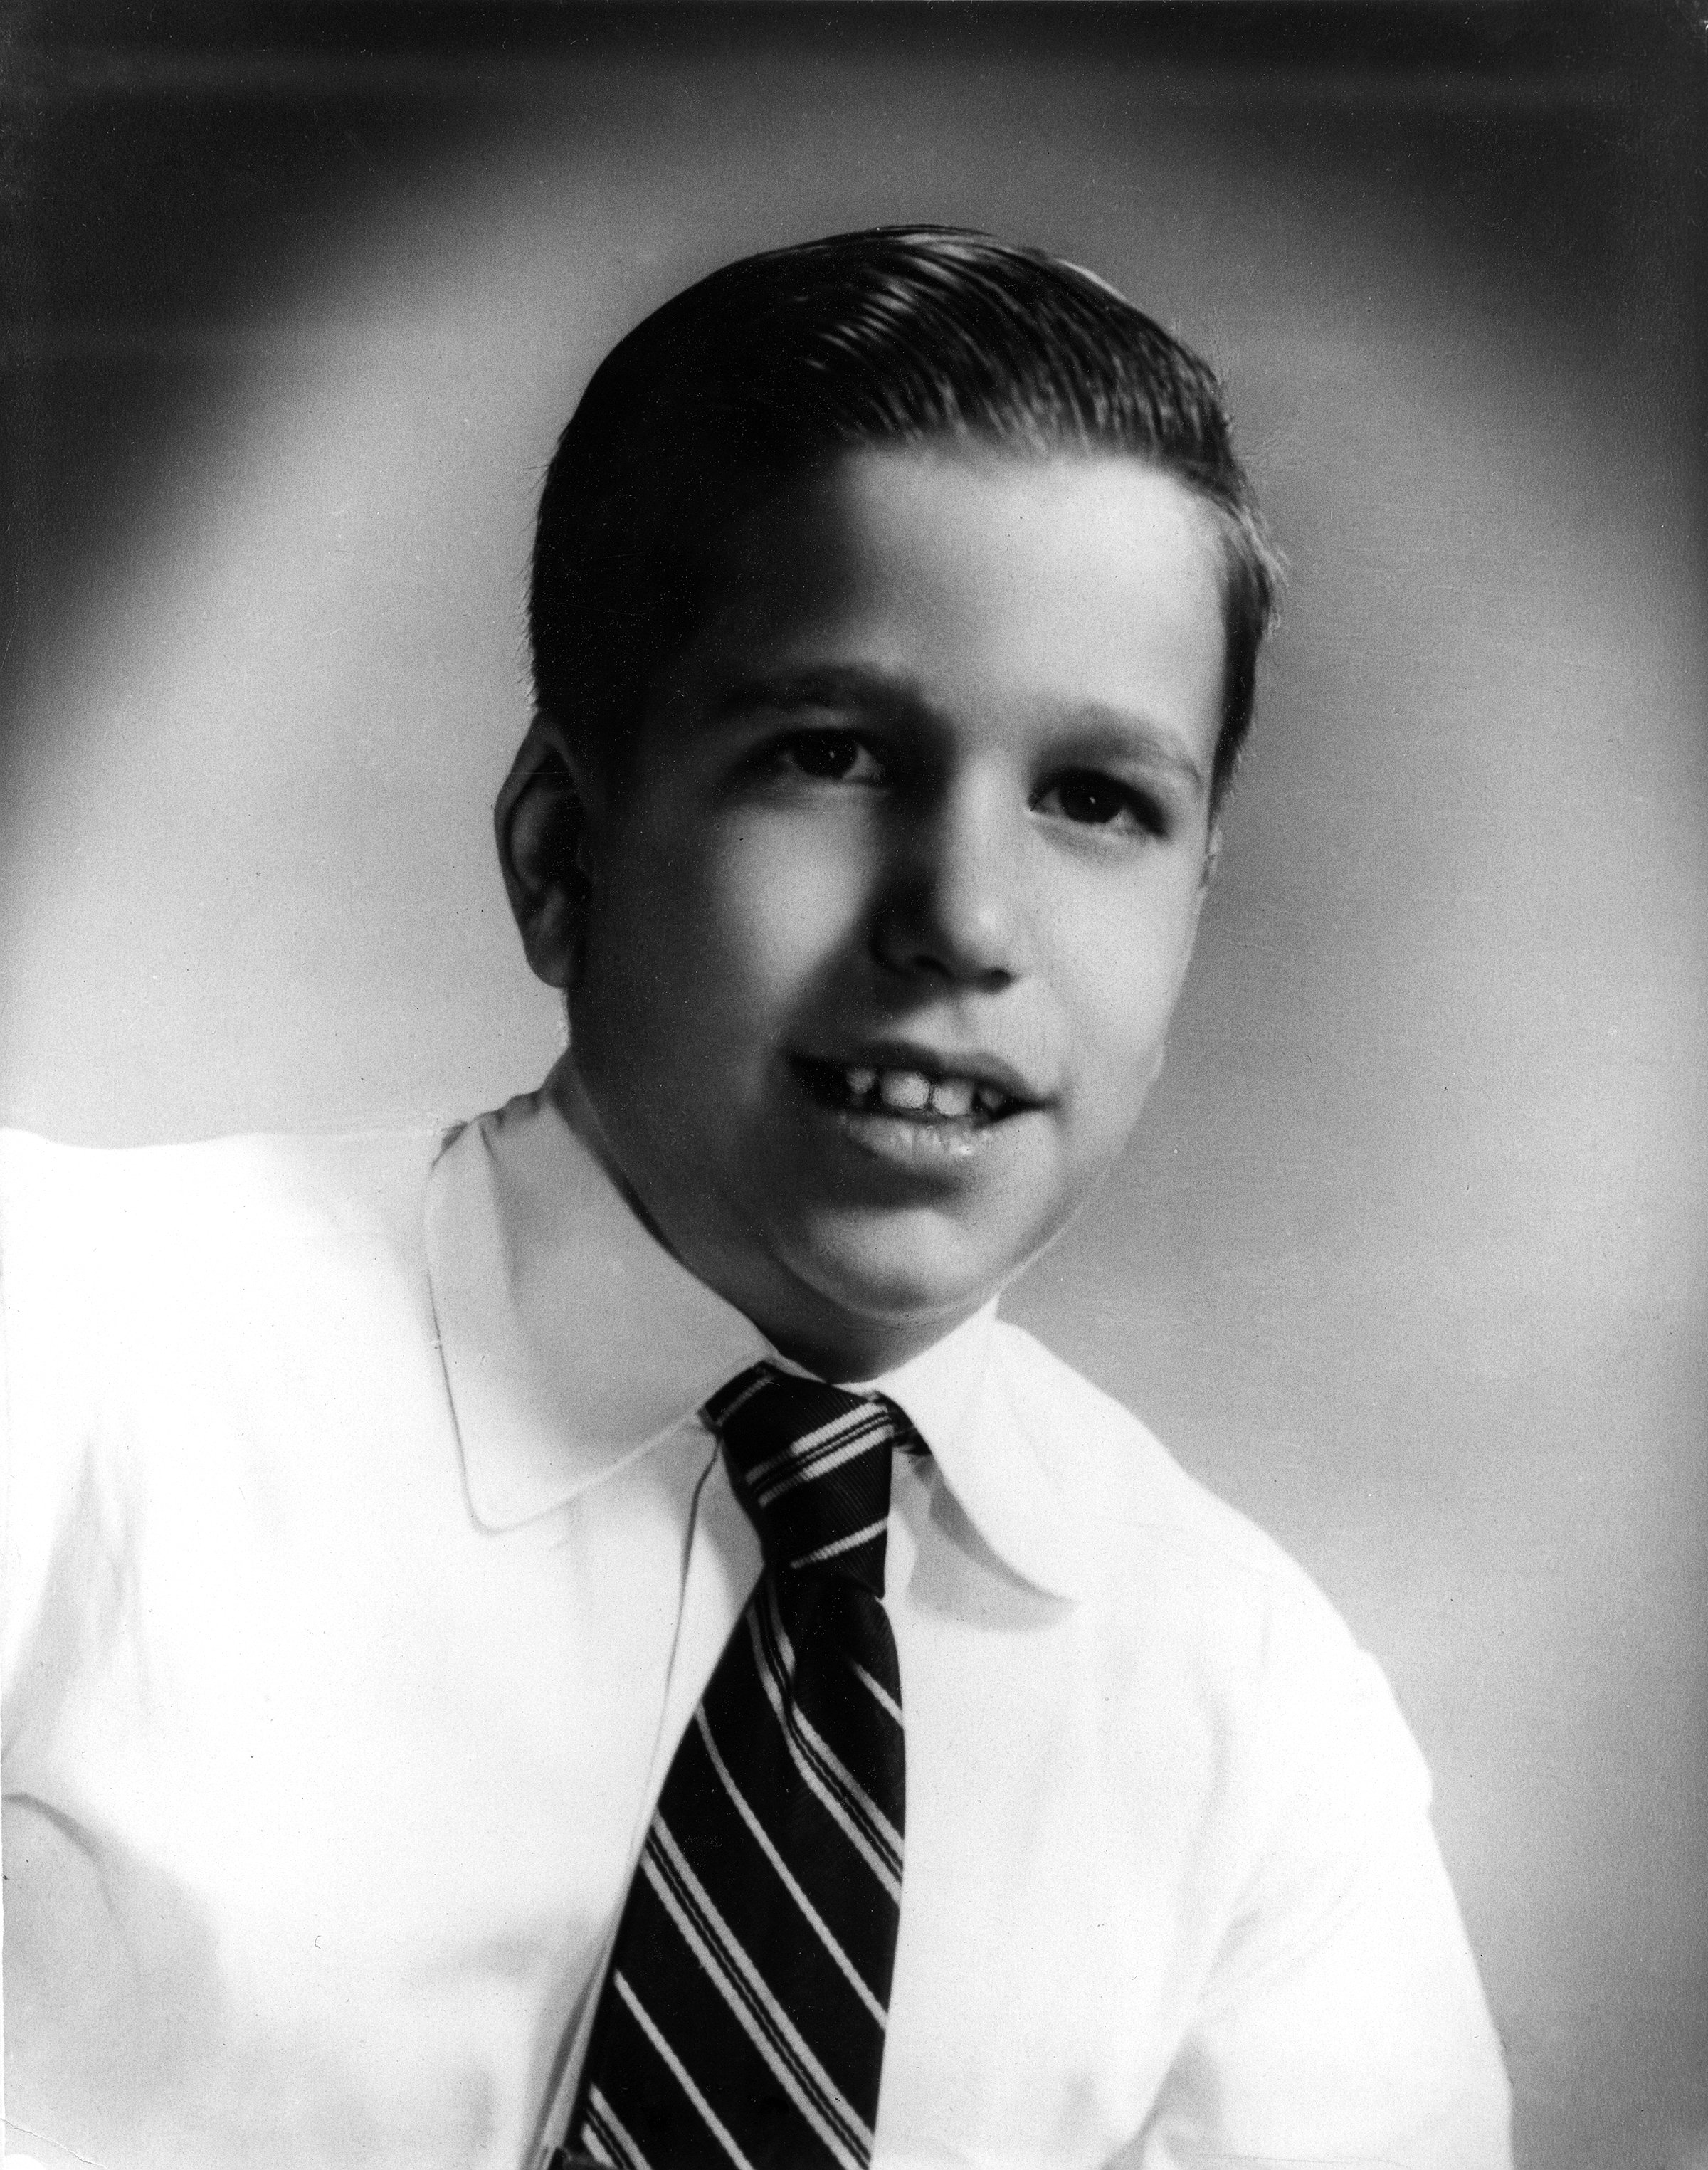 A young Henry Winkler | Source: Getty Images